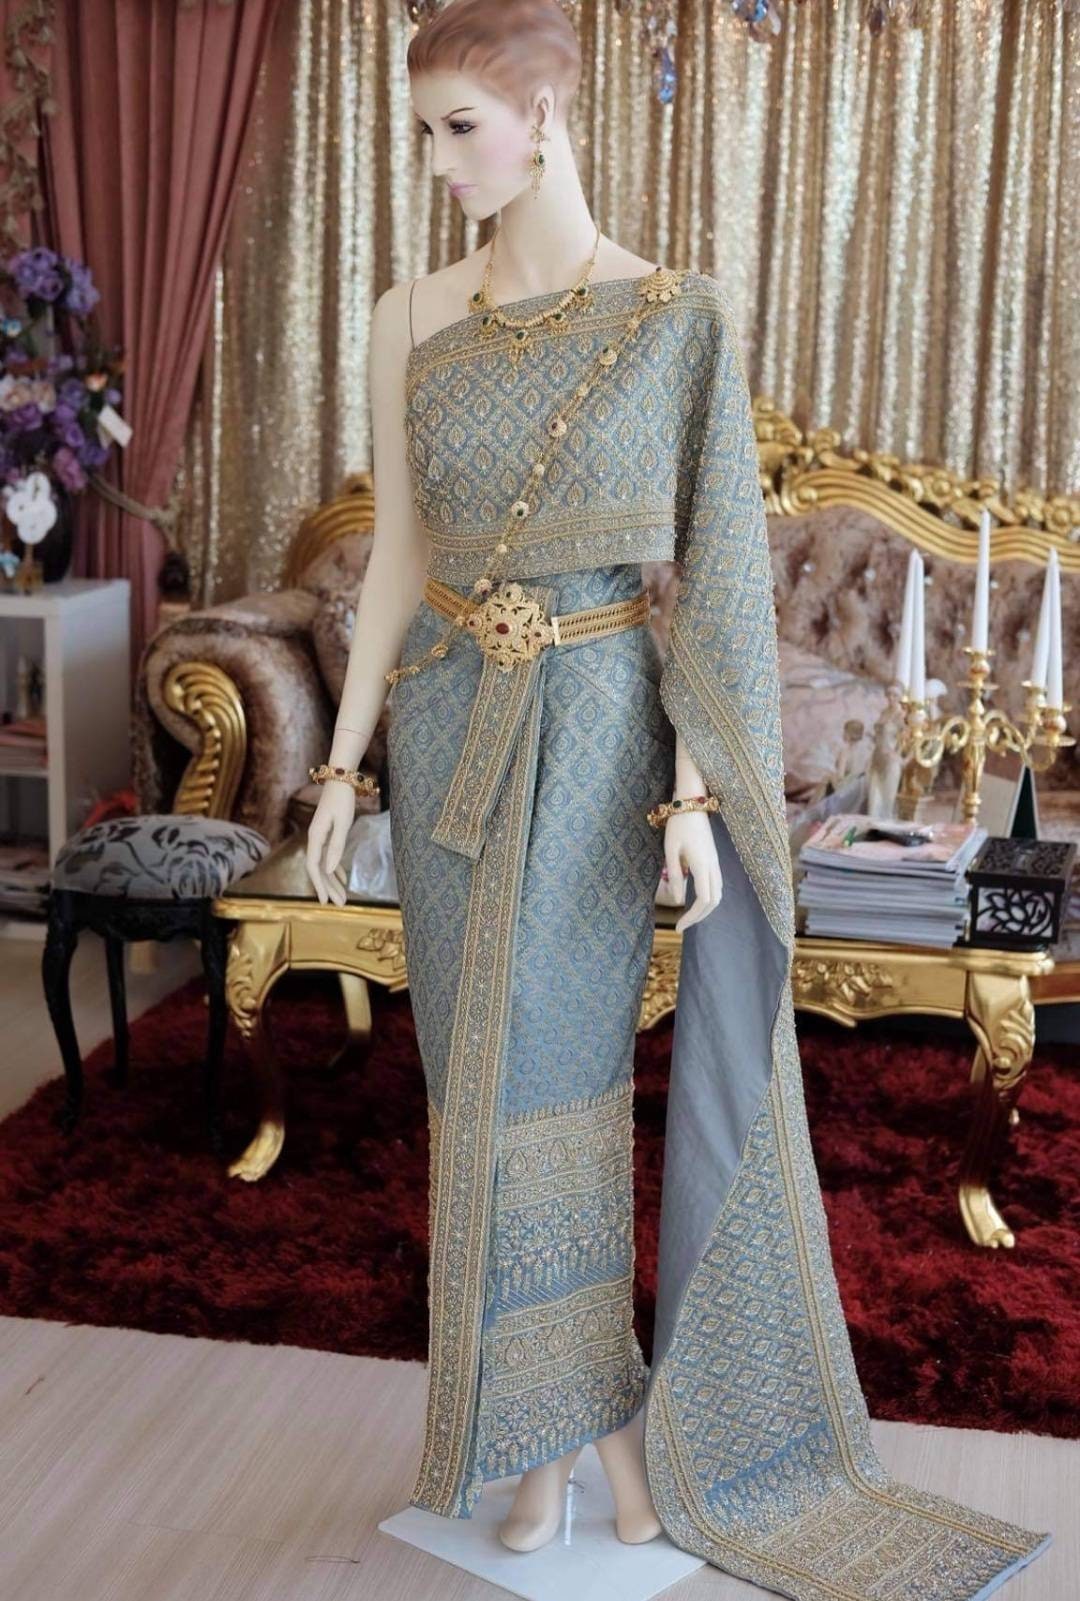 Cambodian Wedding Dress for Sale